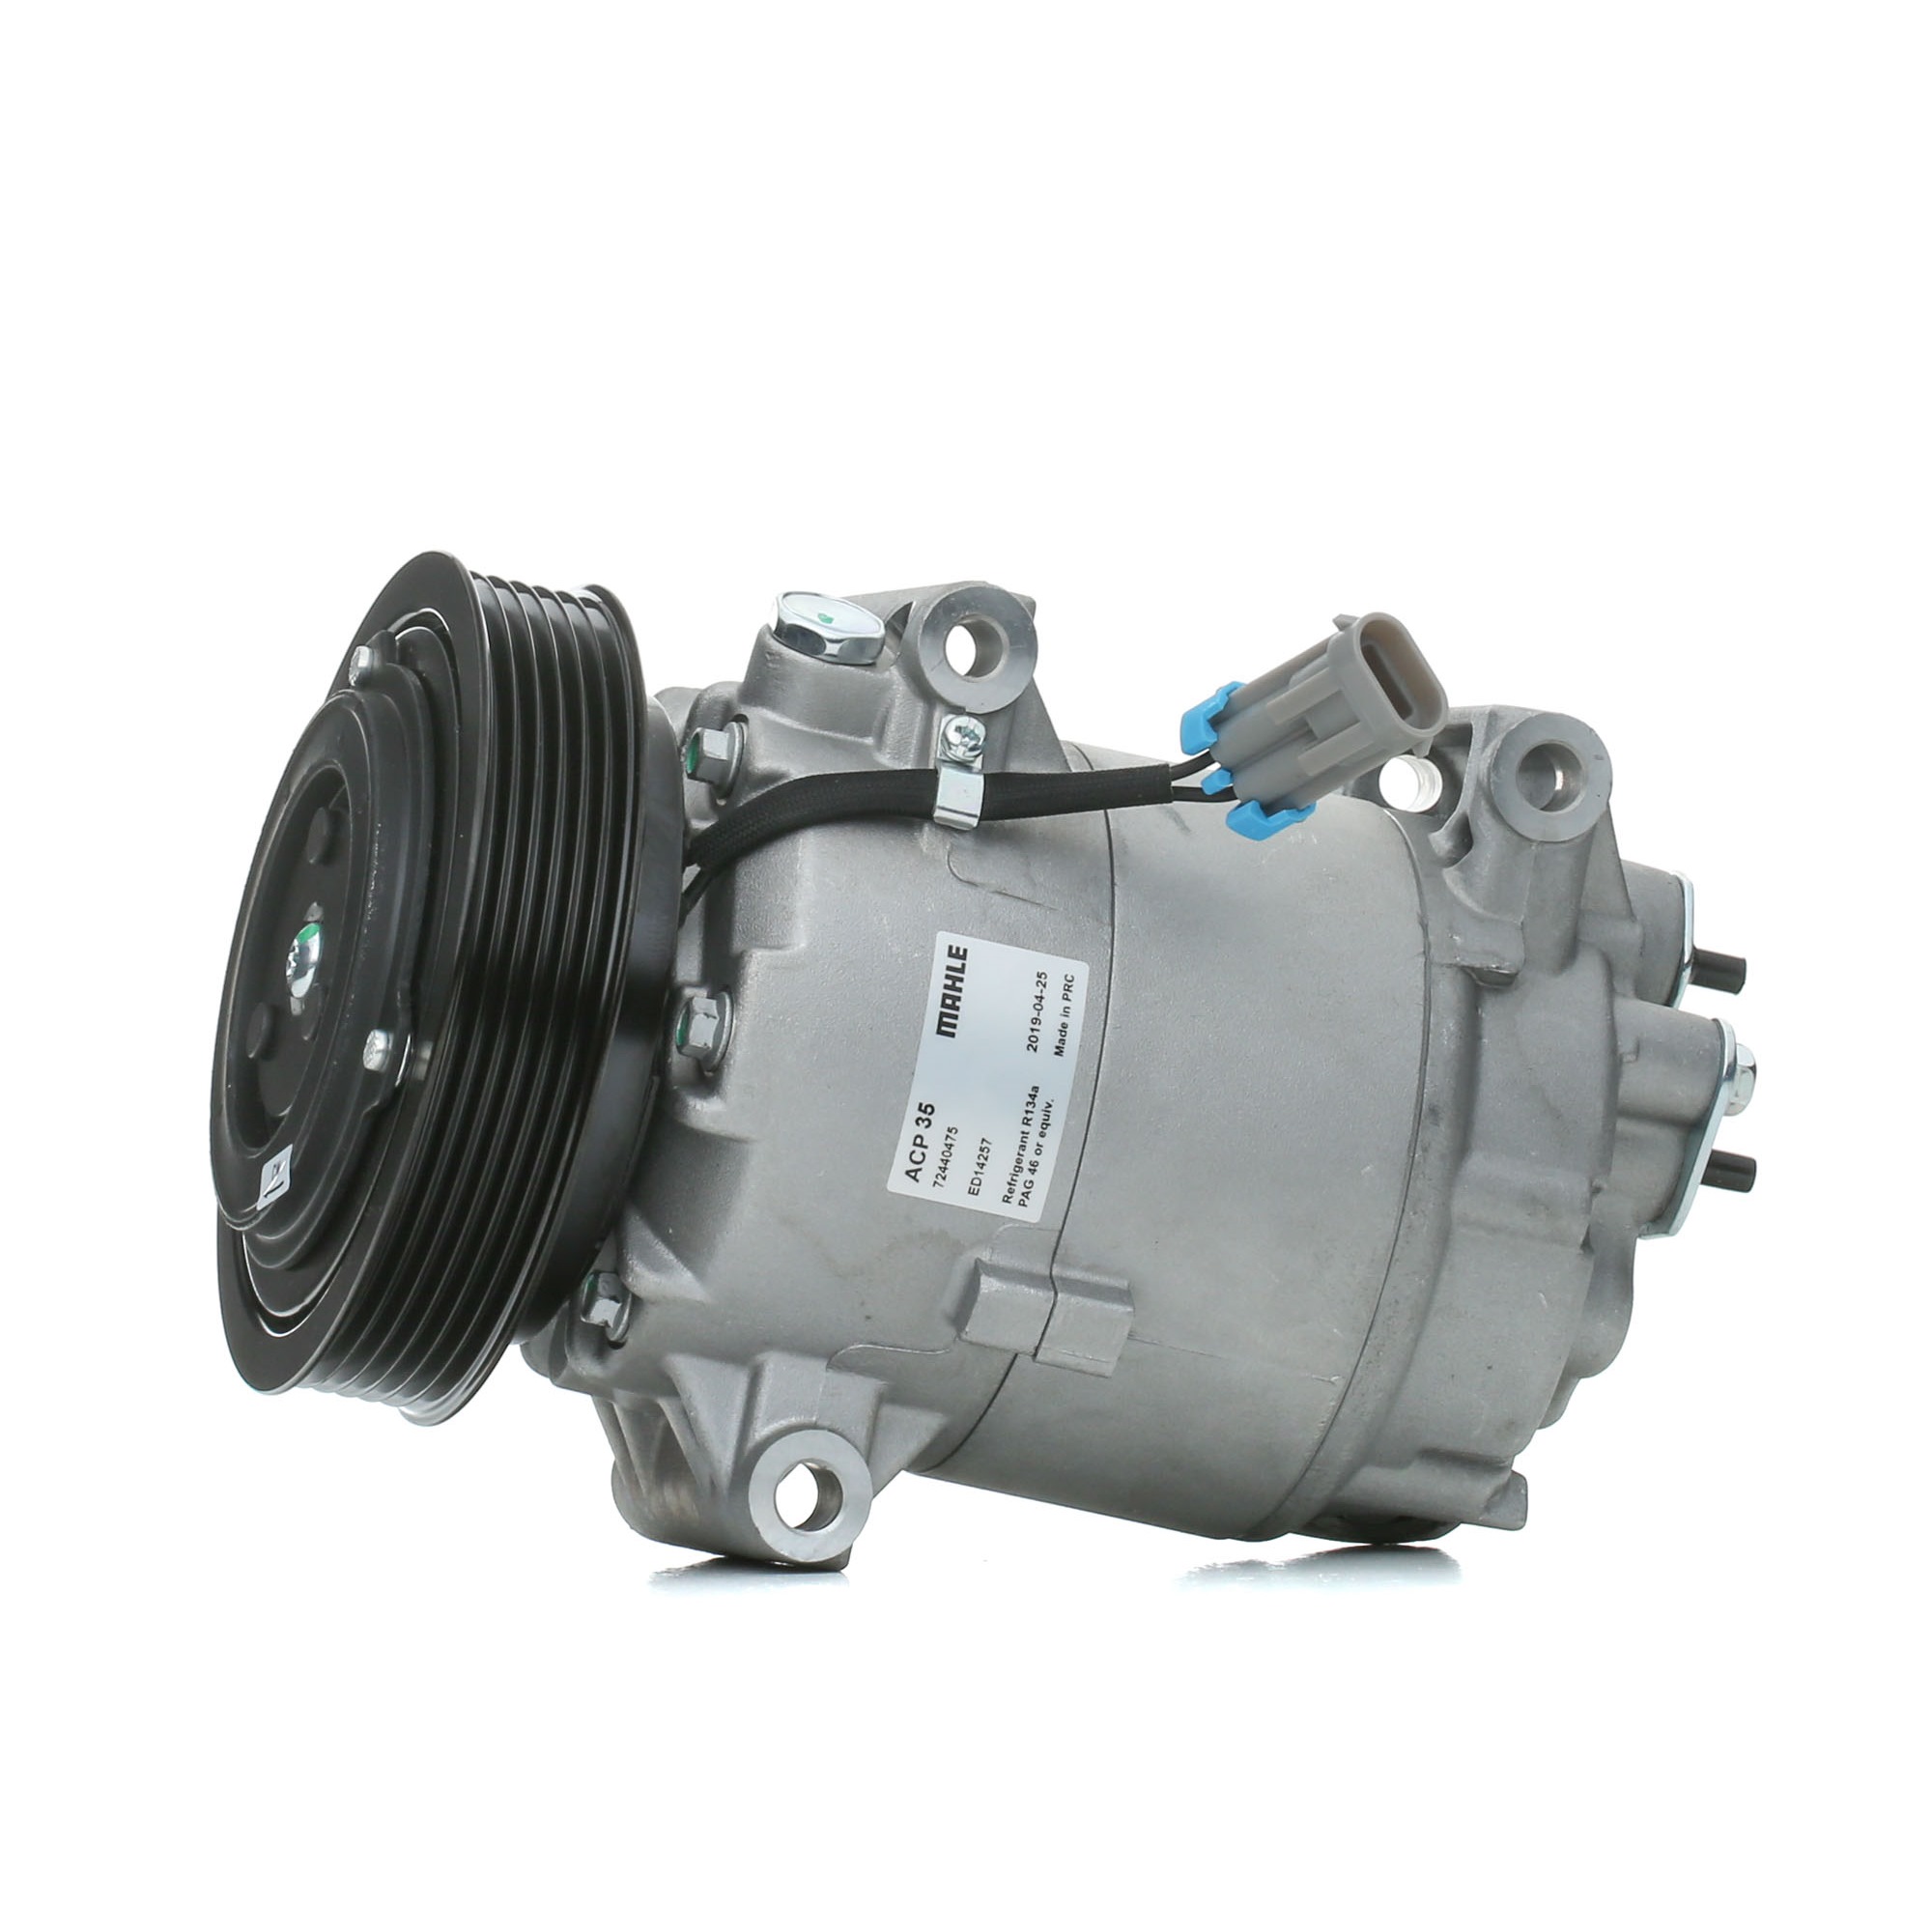 MAHLE ORIGINAL ACP 34 000S Air conditioning compressor CVC5, 12V, PAG 46, R 134a, with seal ring